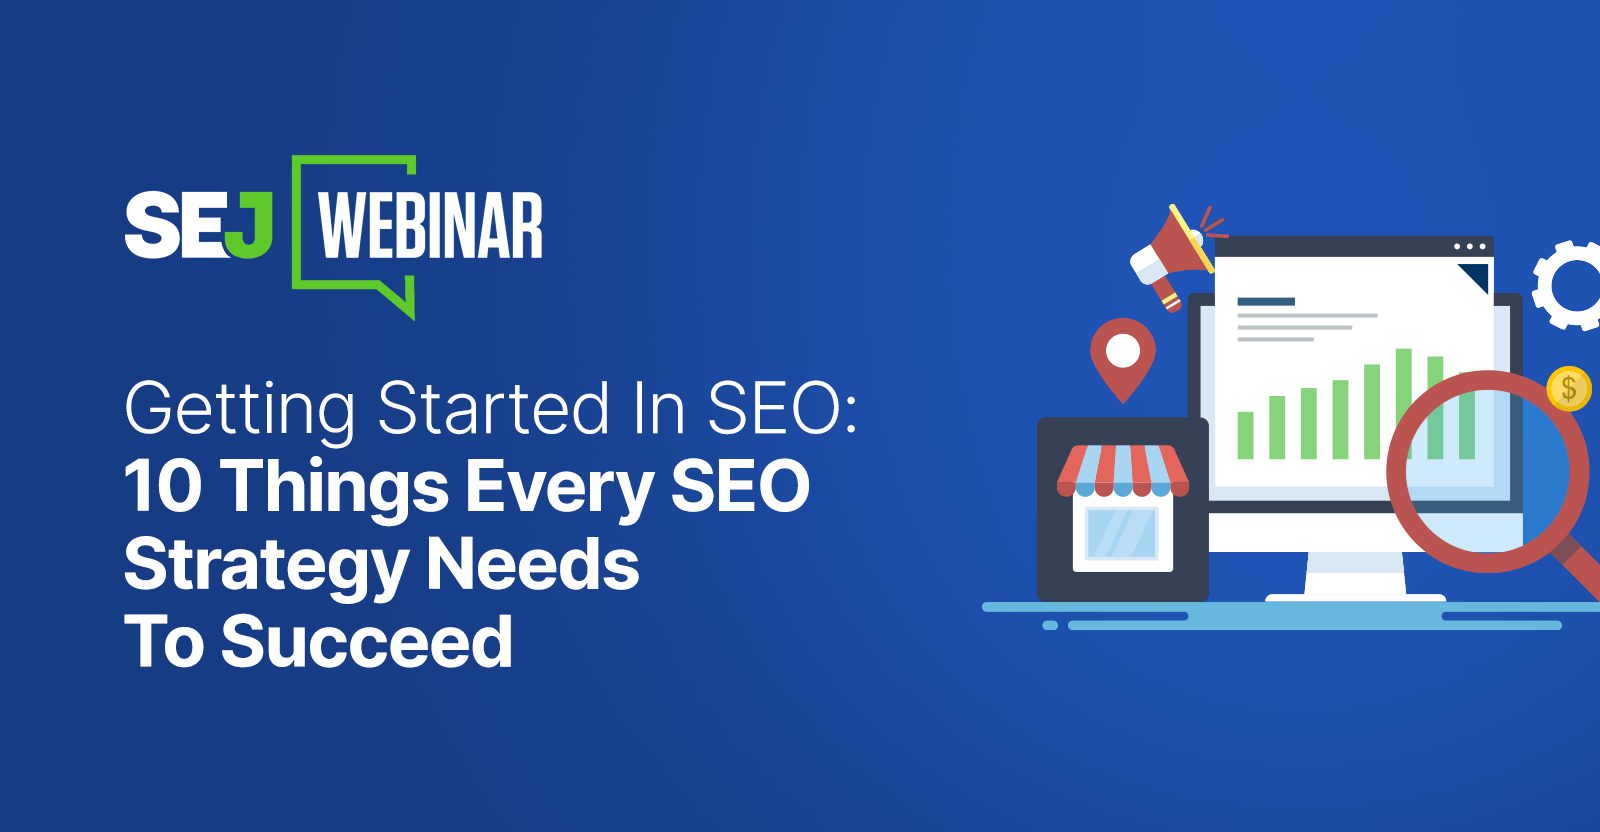 Getting Started In SEO: 10 Things Every SEO Strategy Needs [Webinar]